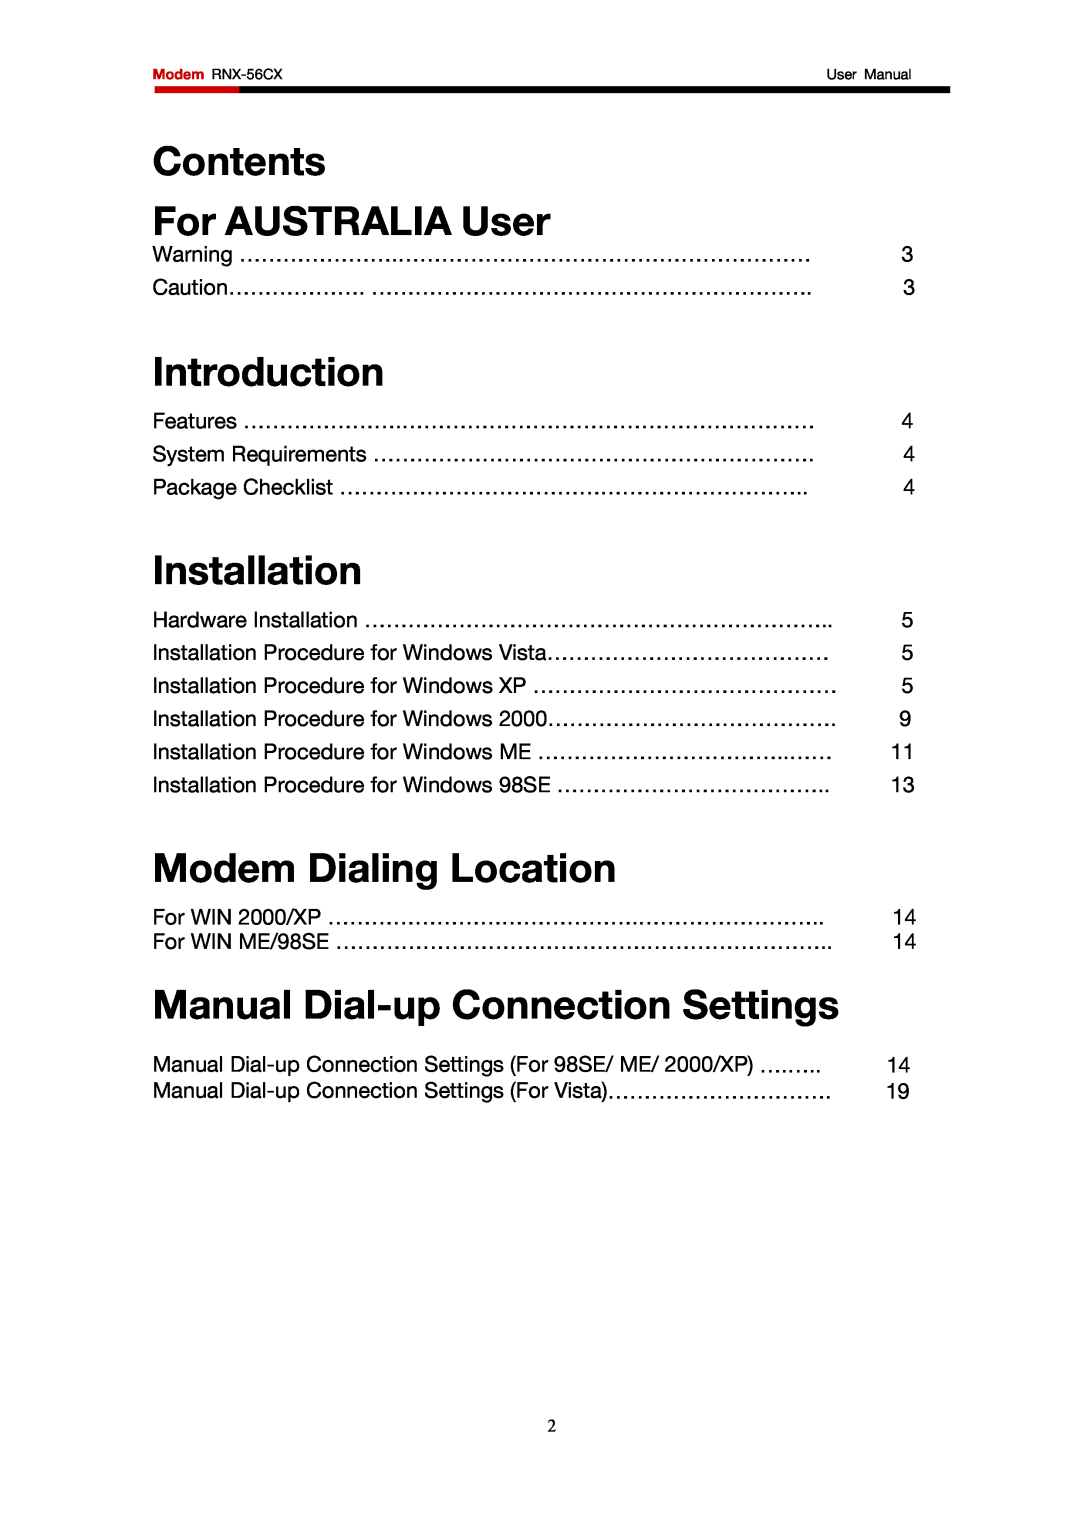 Rosewill RNX-56CX user manual Contents For AUSTRALIA User, Introduction, Installation, Modem Dialing Location 